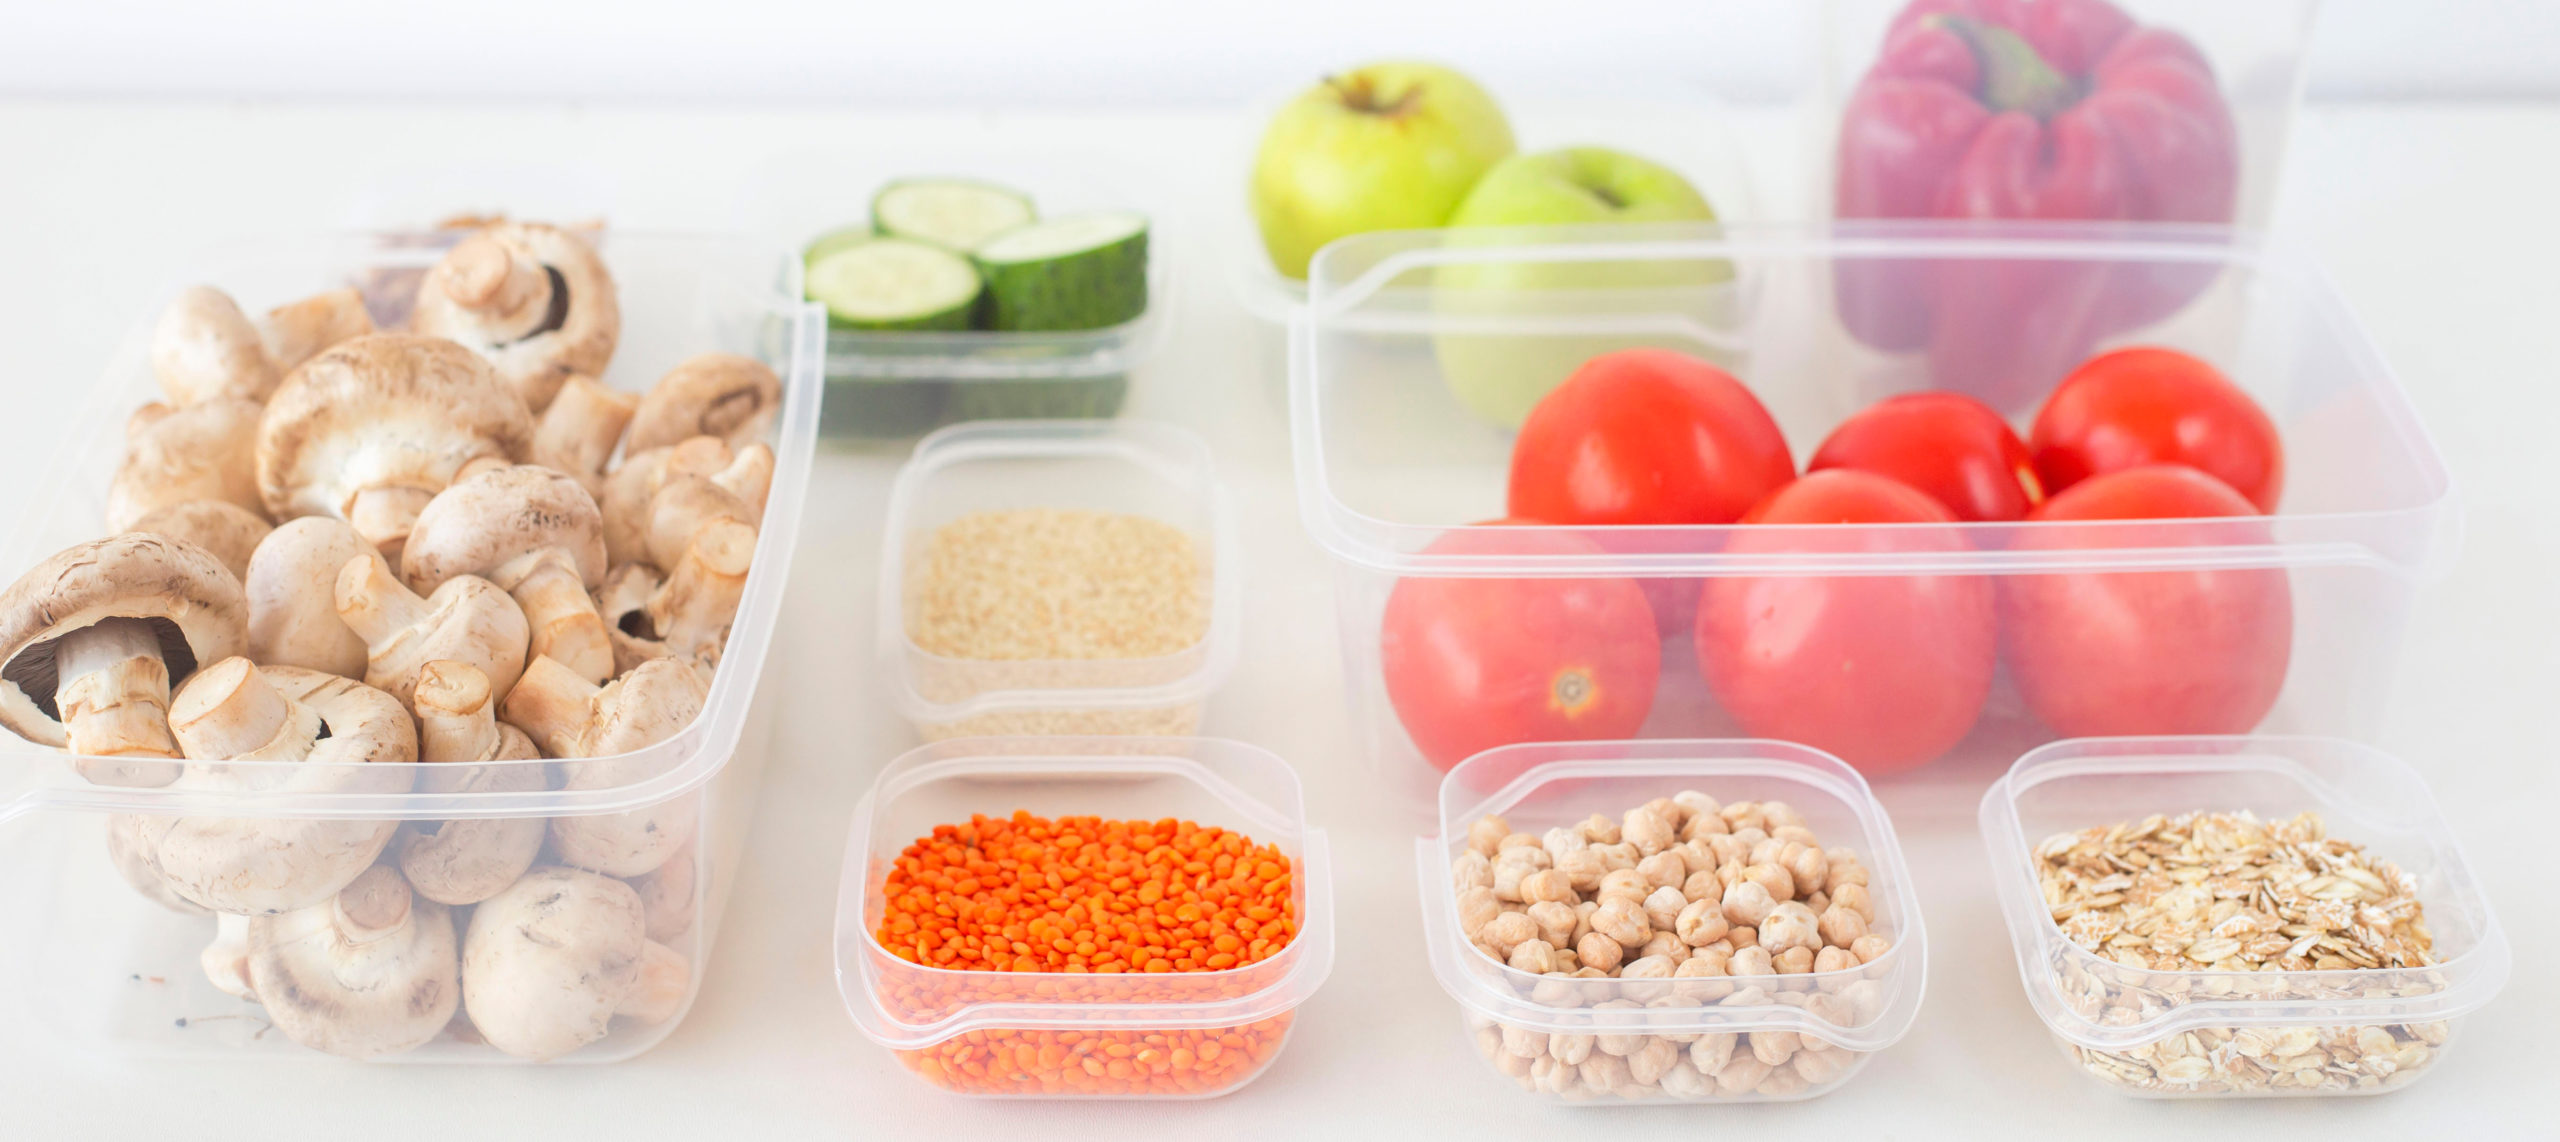 Storing Food Safely- How to Make it Last Longer and What the Dates Mean